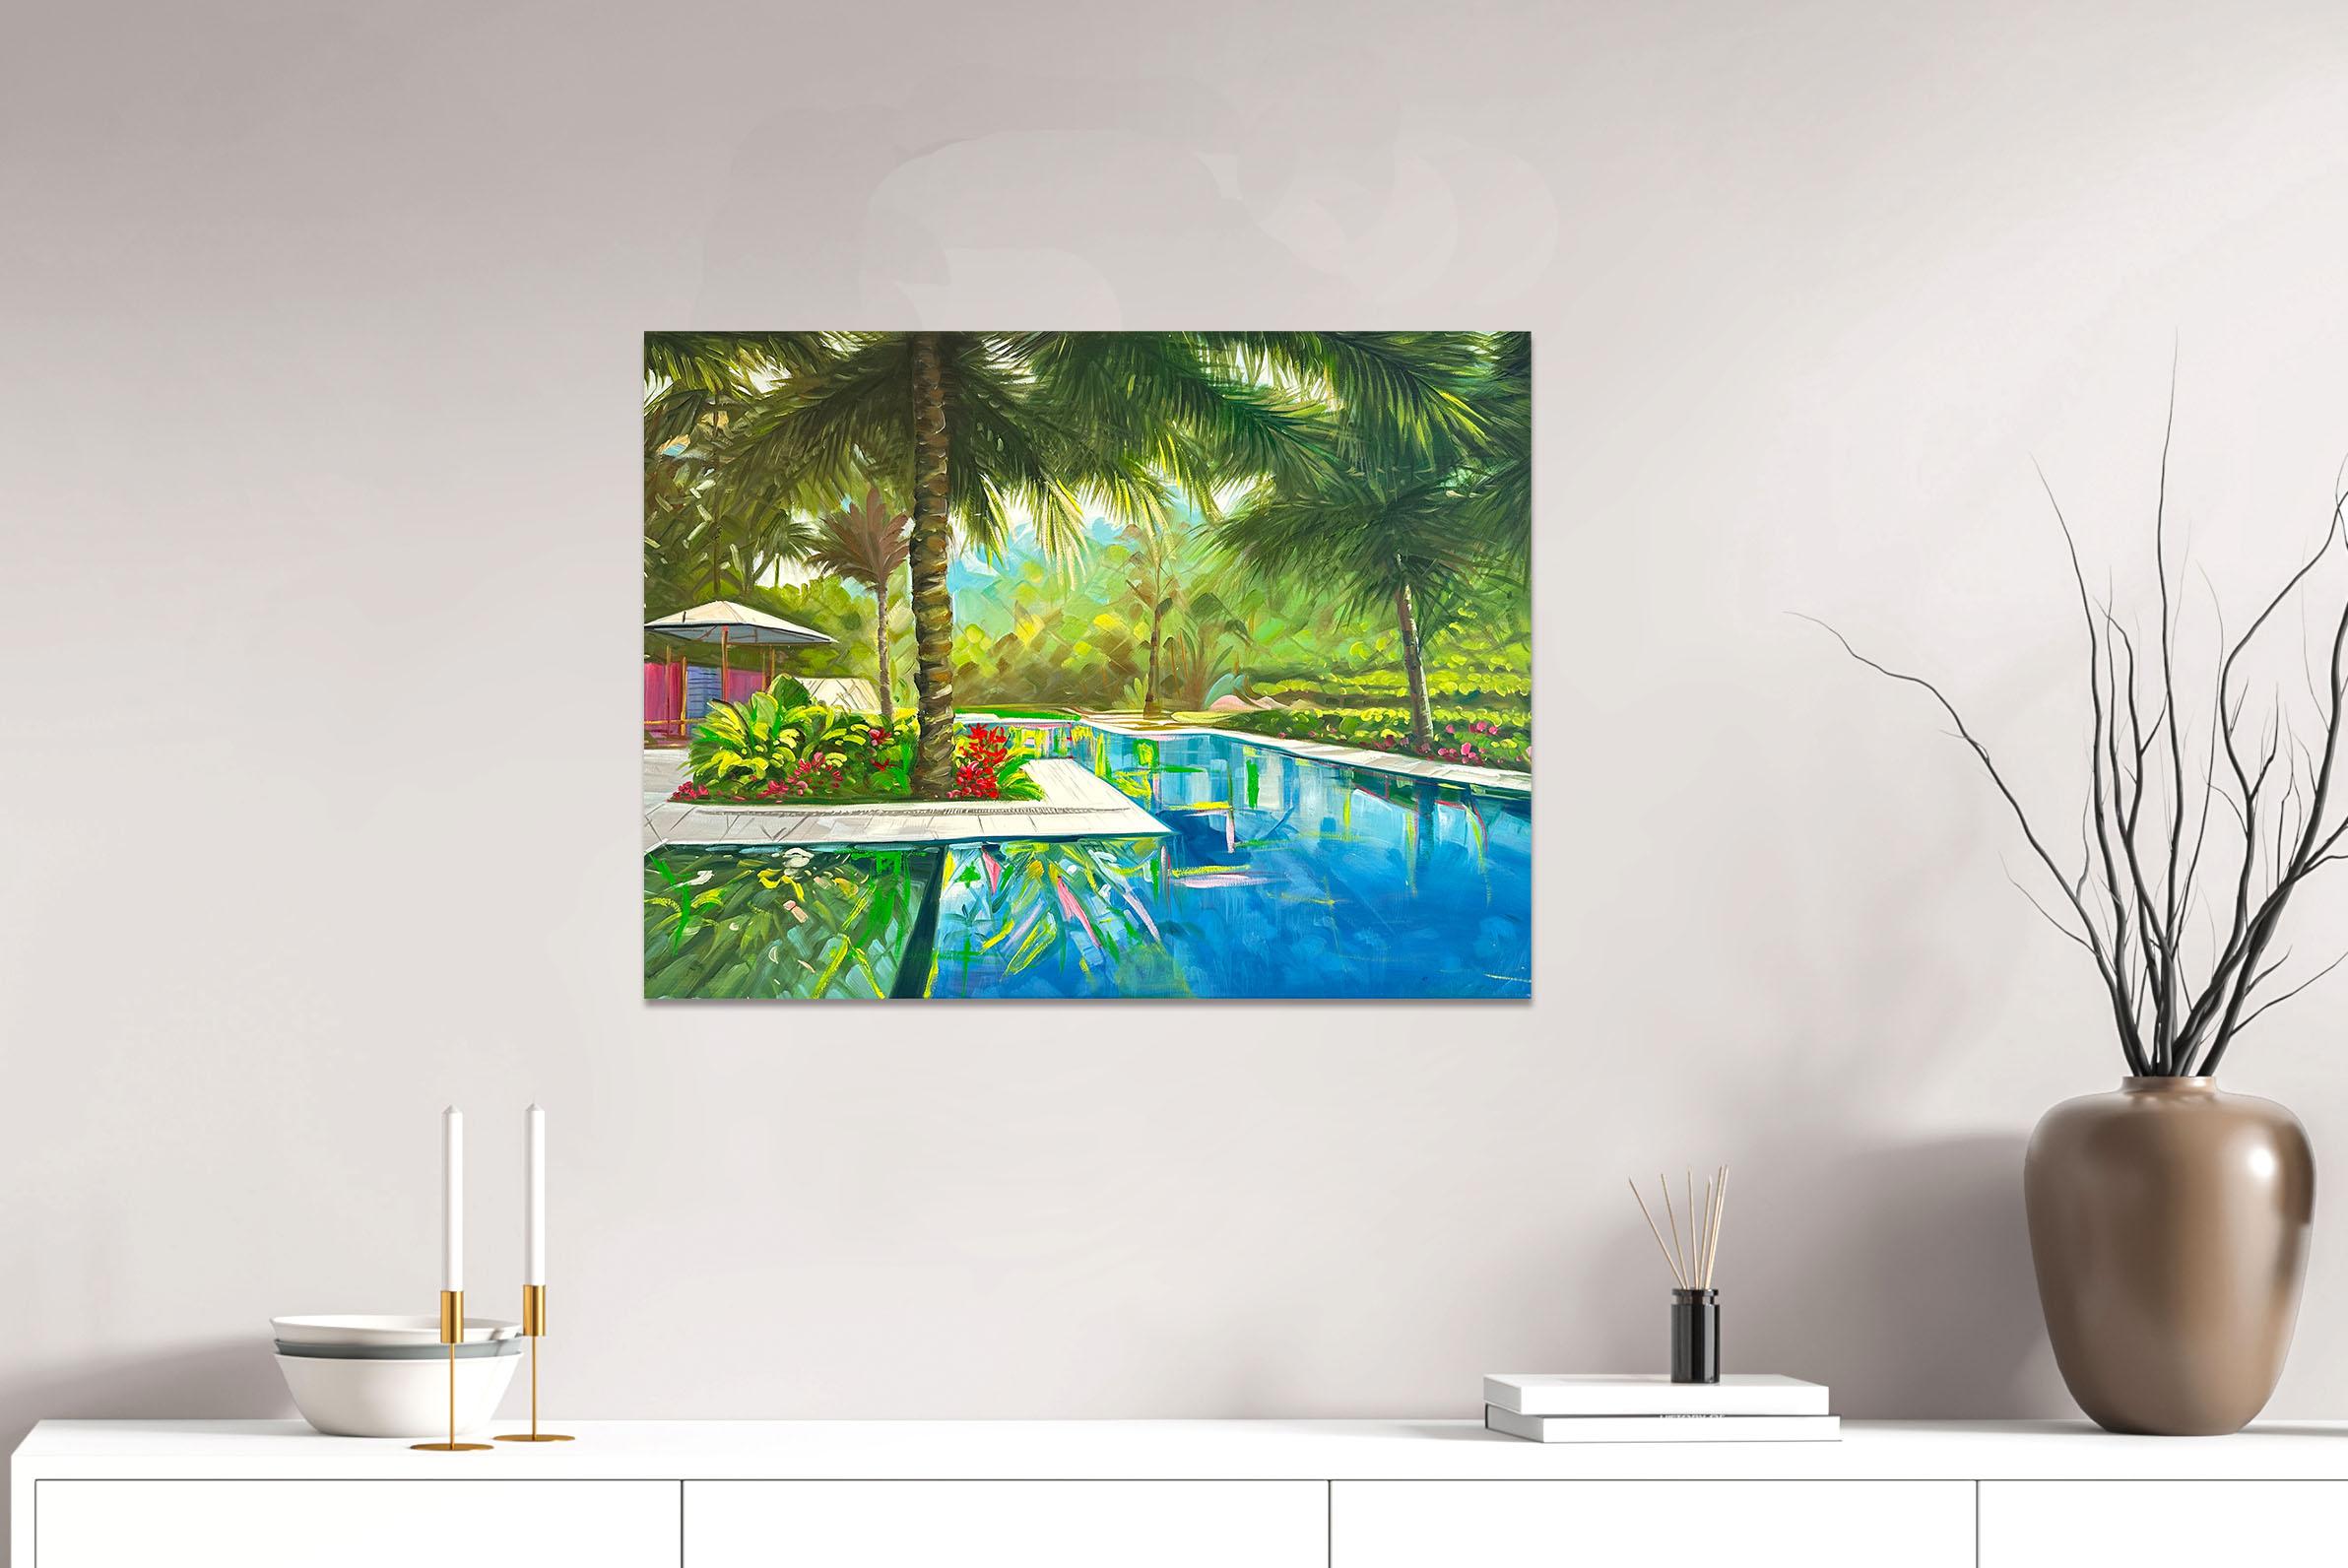 Let's Meet at the Pool - Contemporary Architecture Villa Oil Painting For Sale 7